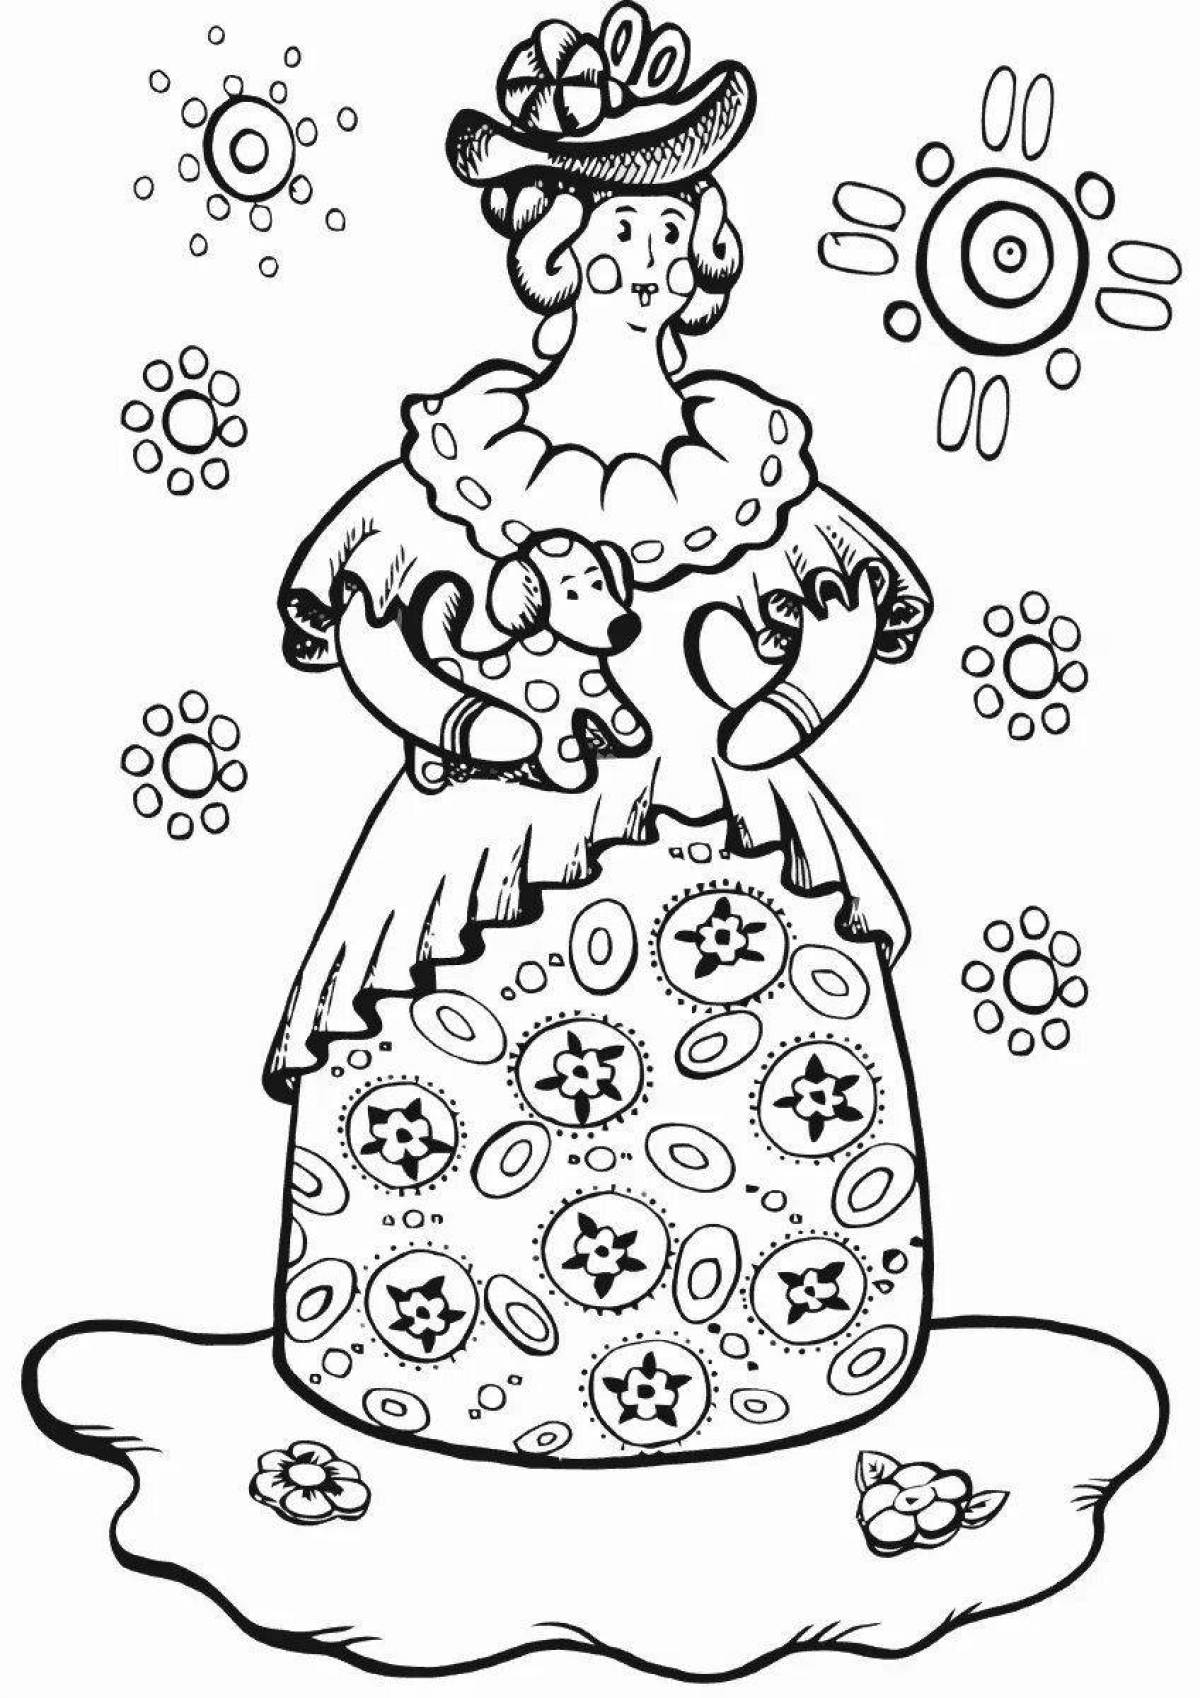 Coloring page fascinating Dymkovo lady for children